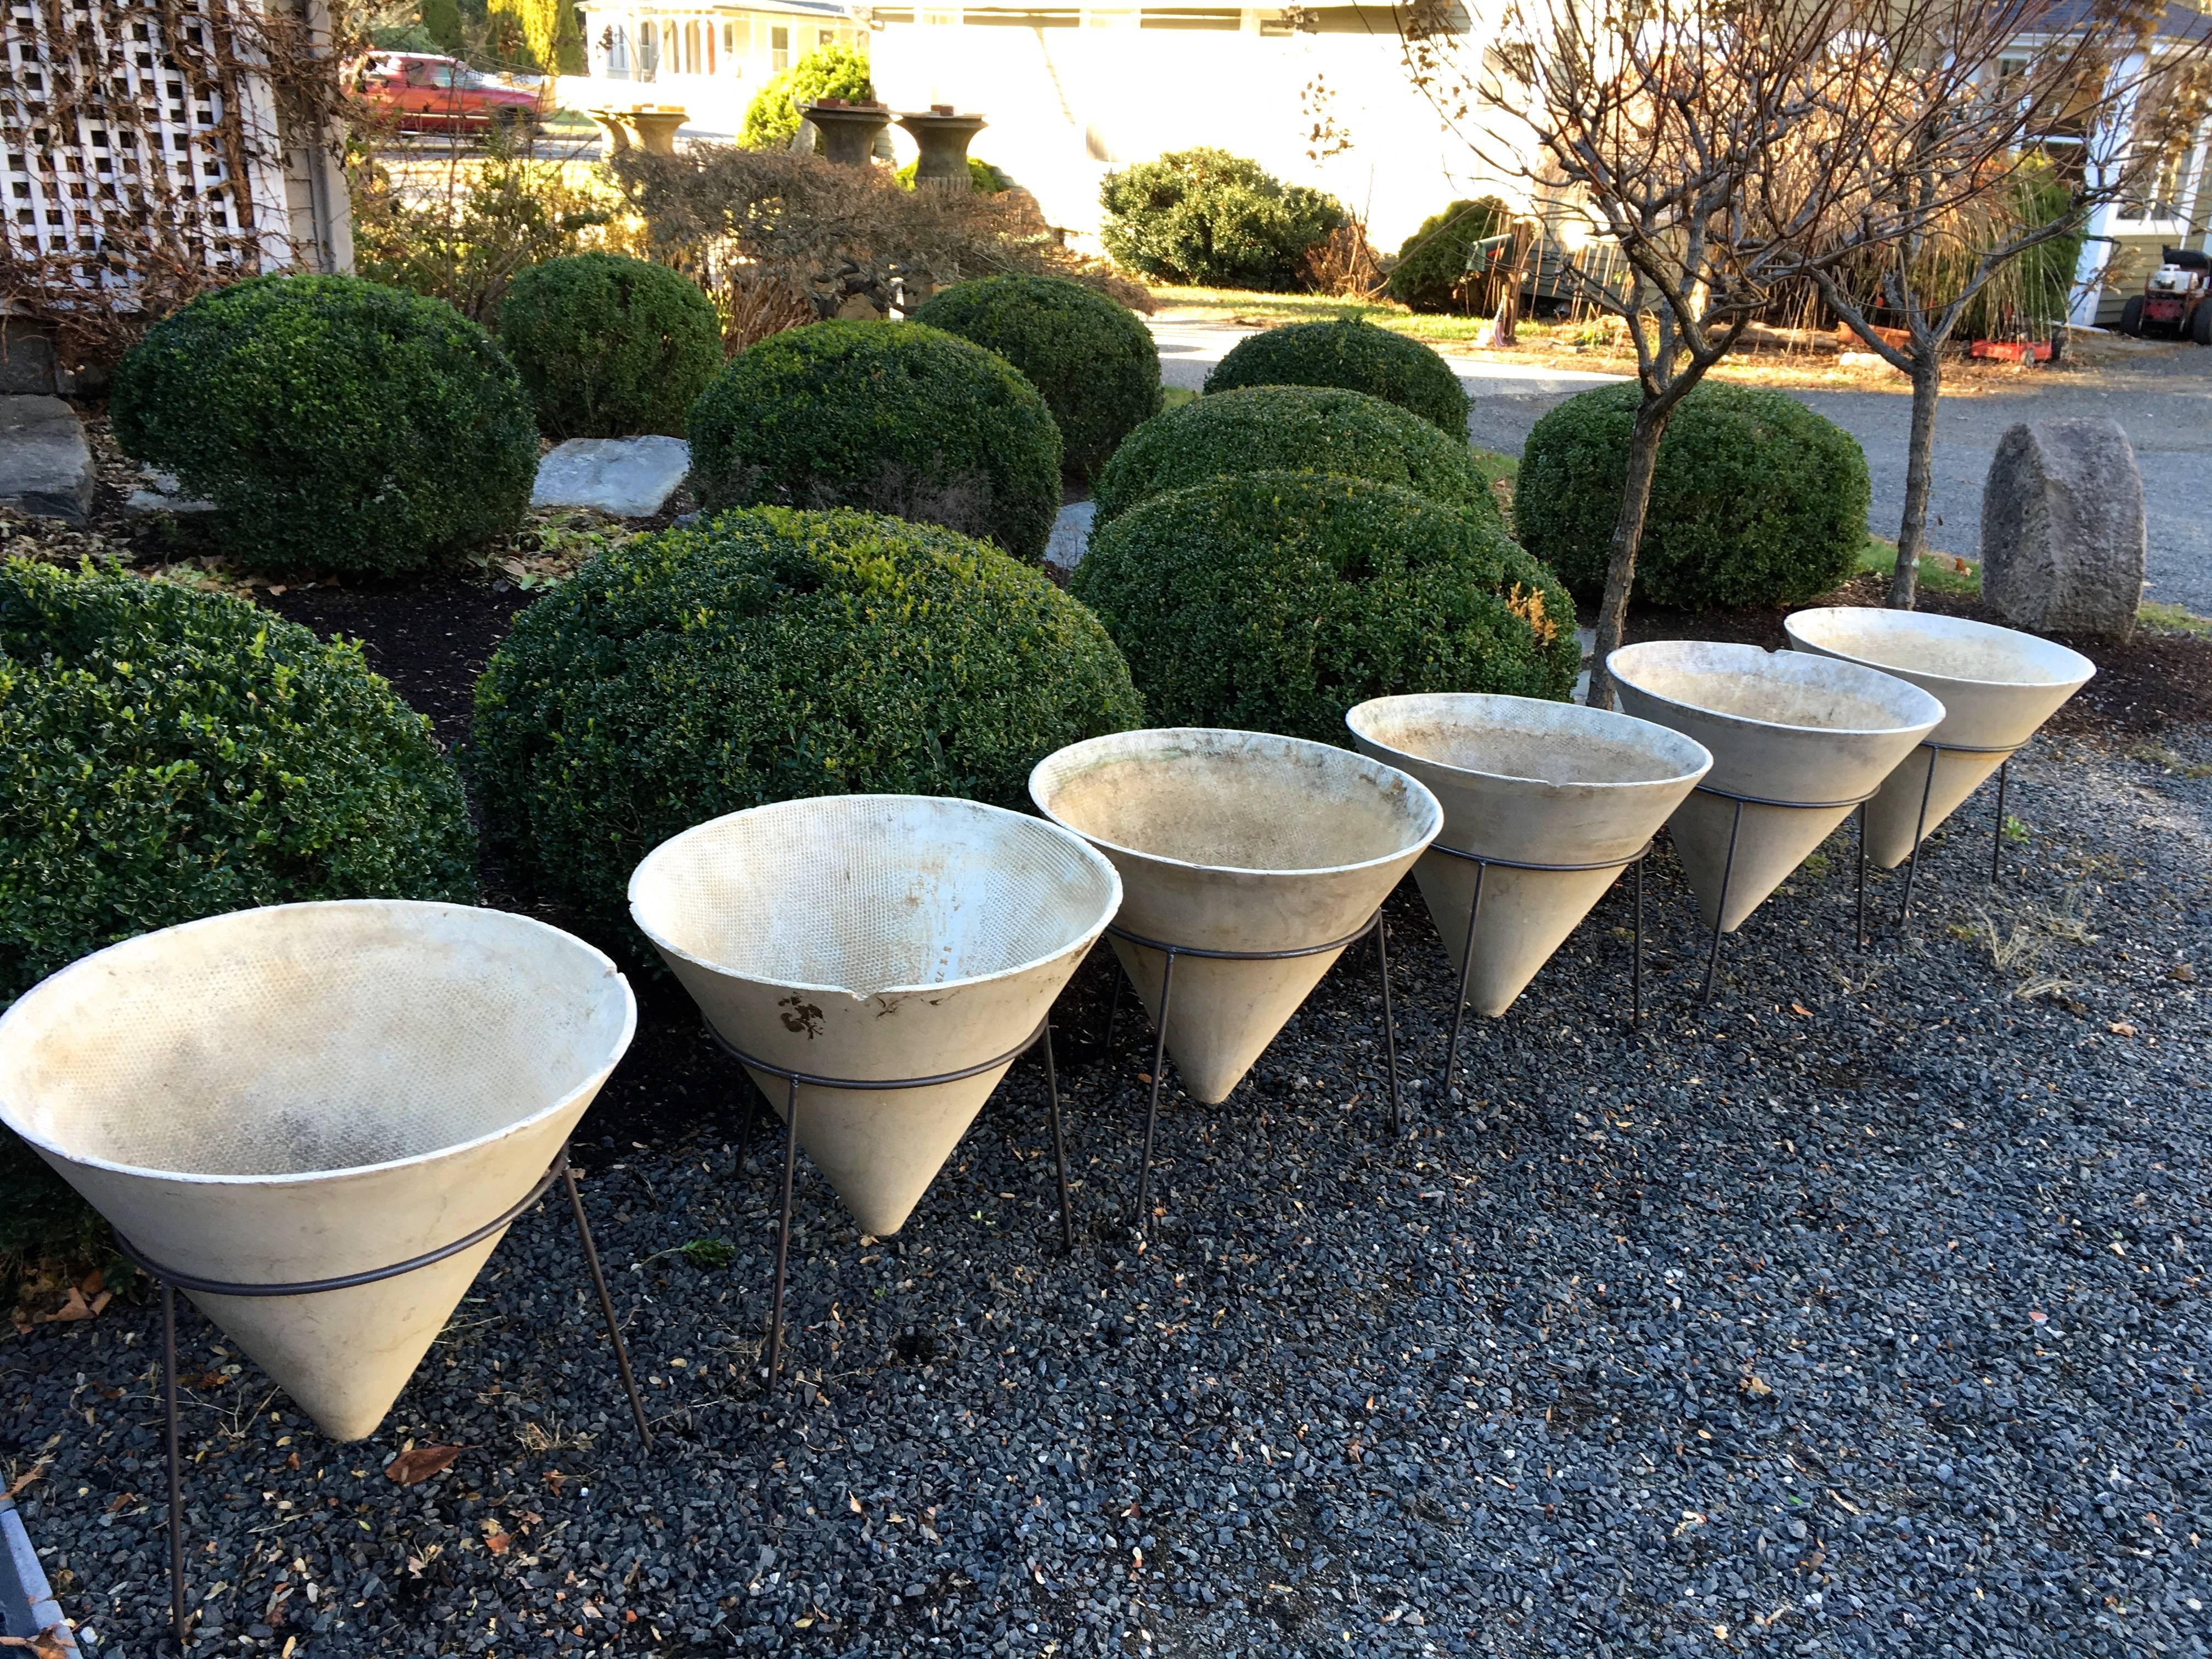 We were very fortunate to source these numbered Willy Guhl conical planters in all natural and unpainted surface and have had 3-legged contemporary steel stands made for them. We have painted the stands in a satin black finish that resembles